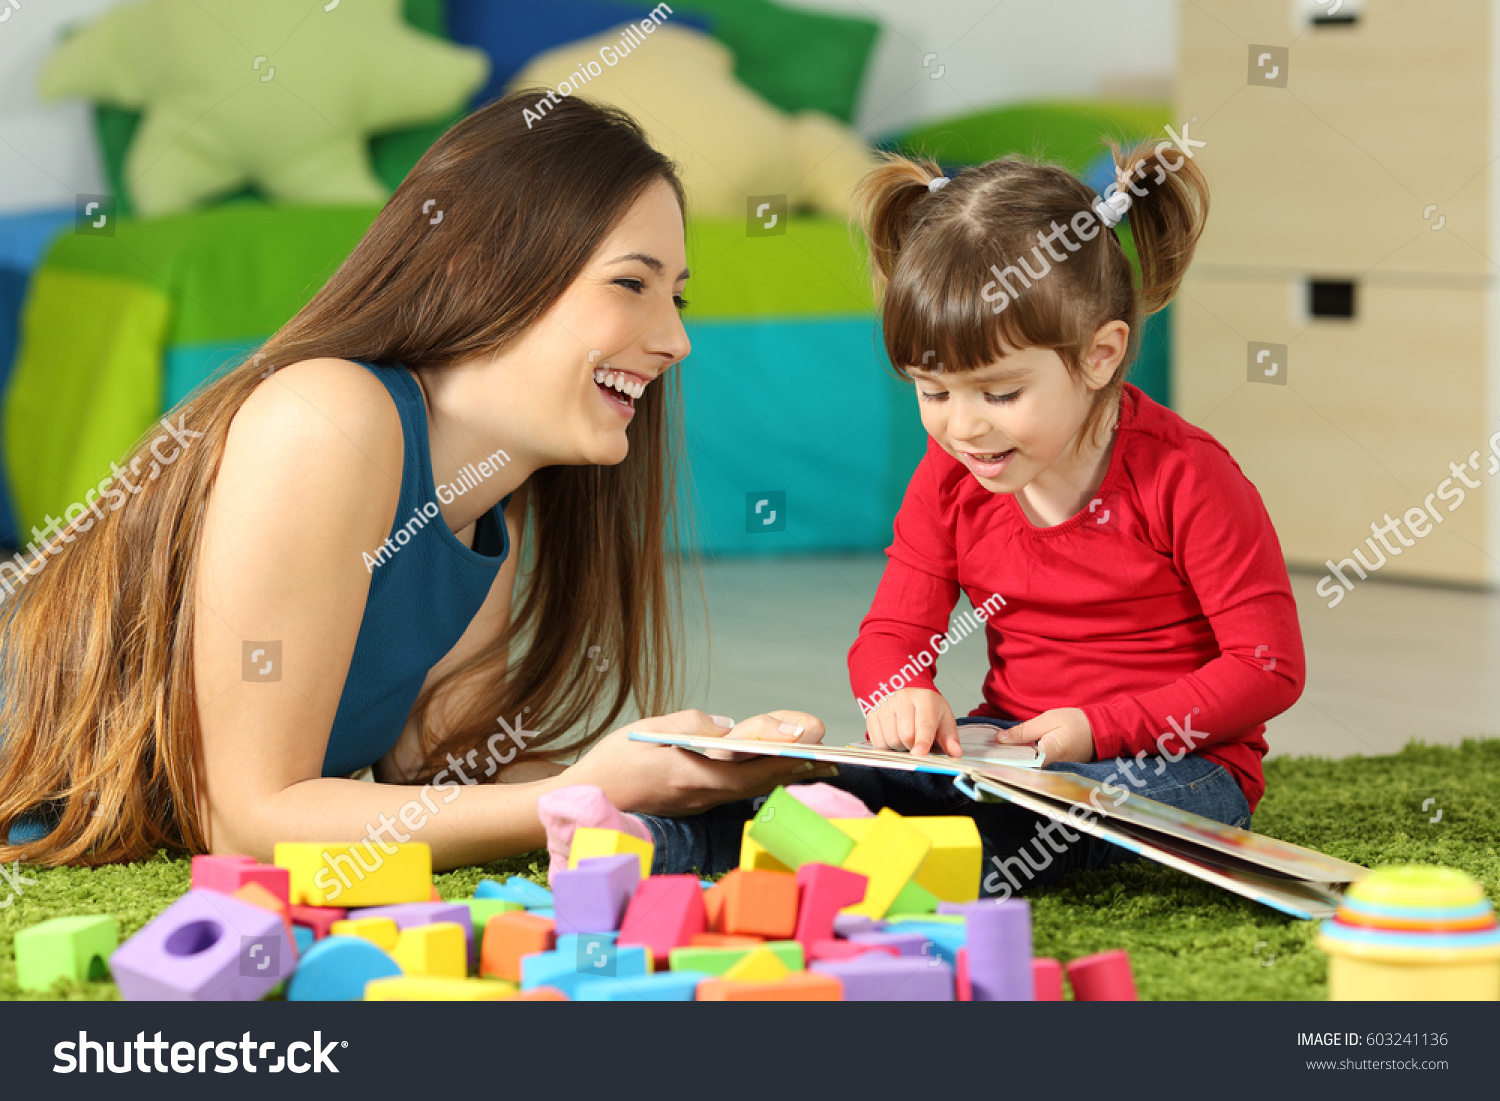 Mother and toddler playing together with a book lying on the floor in the bedroom at home with a colorful background #603241136